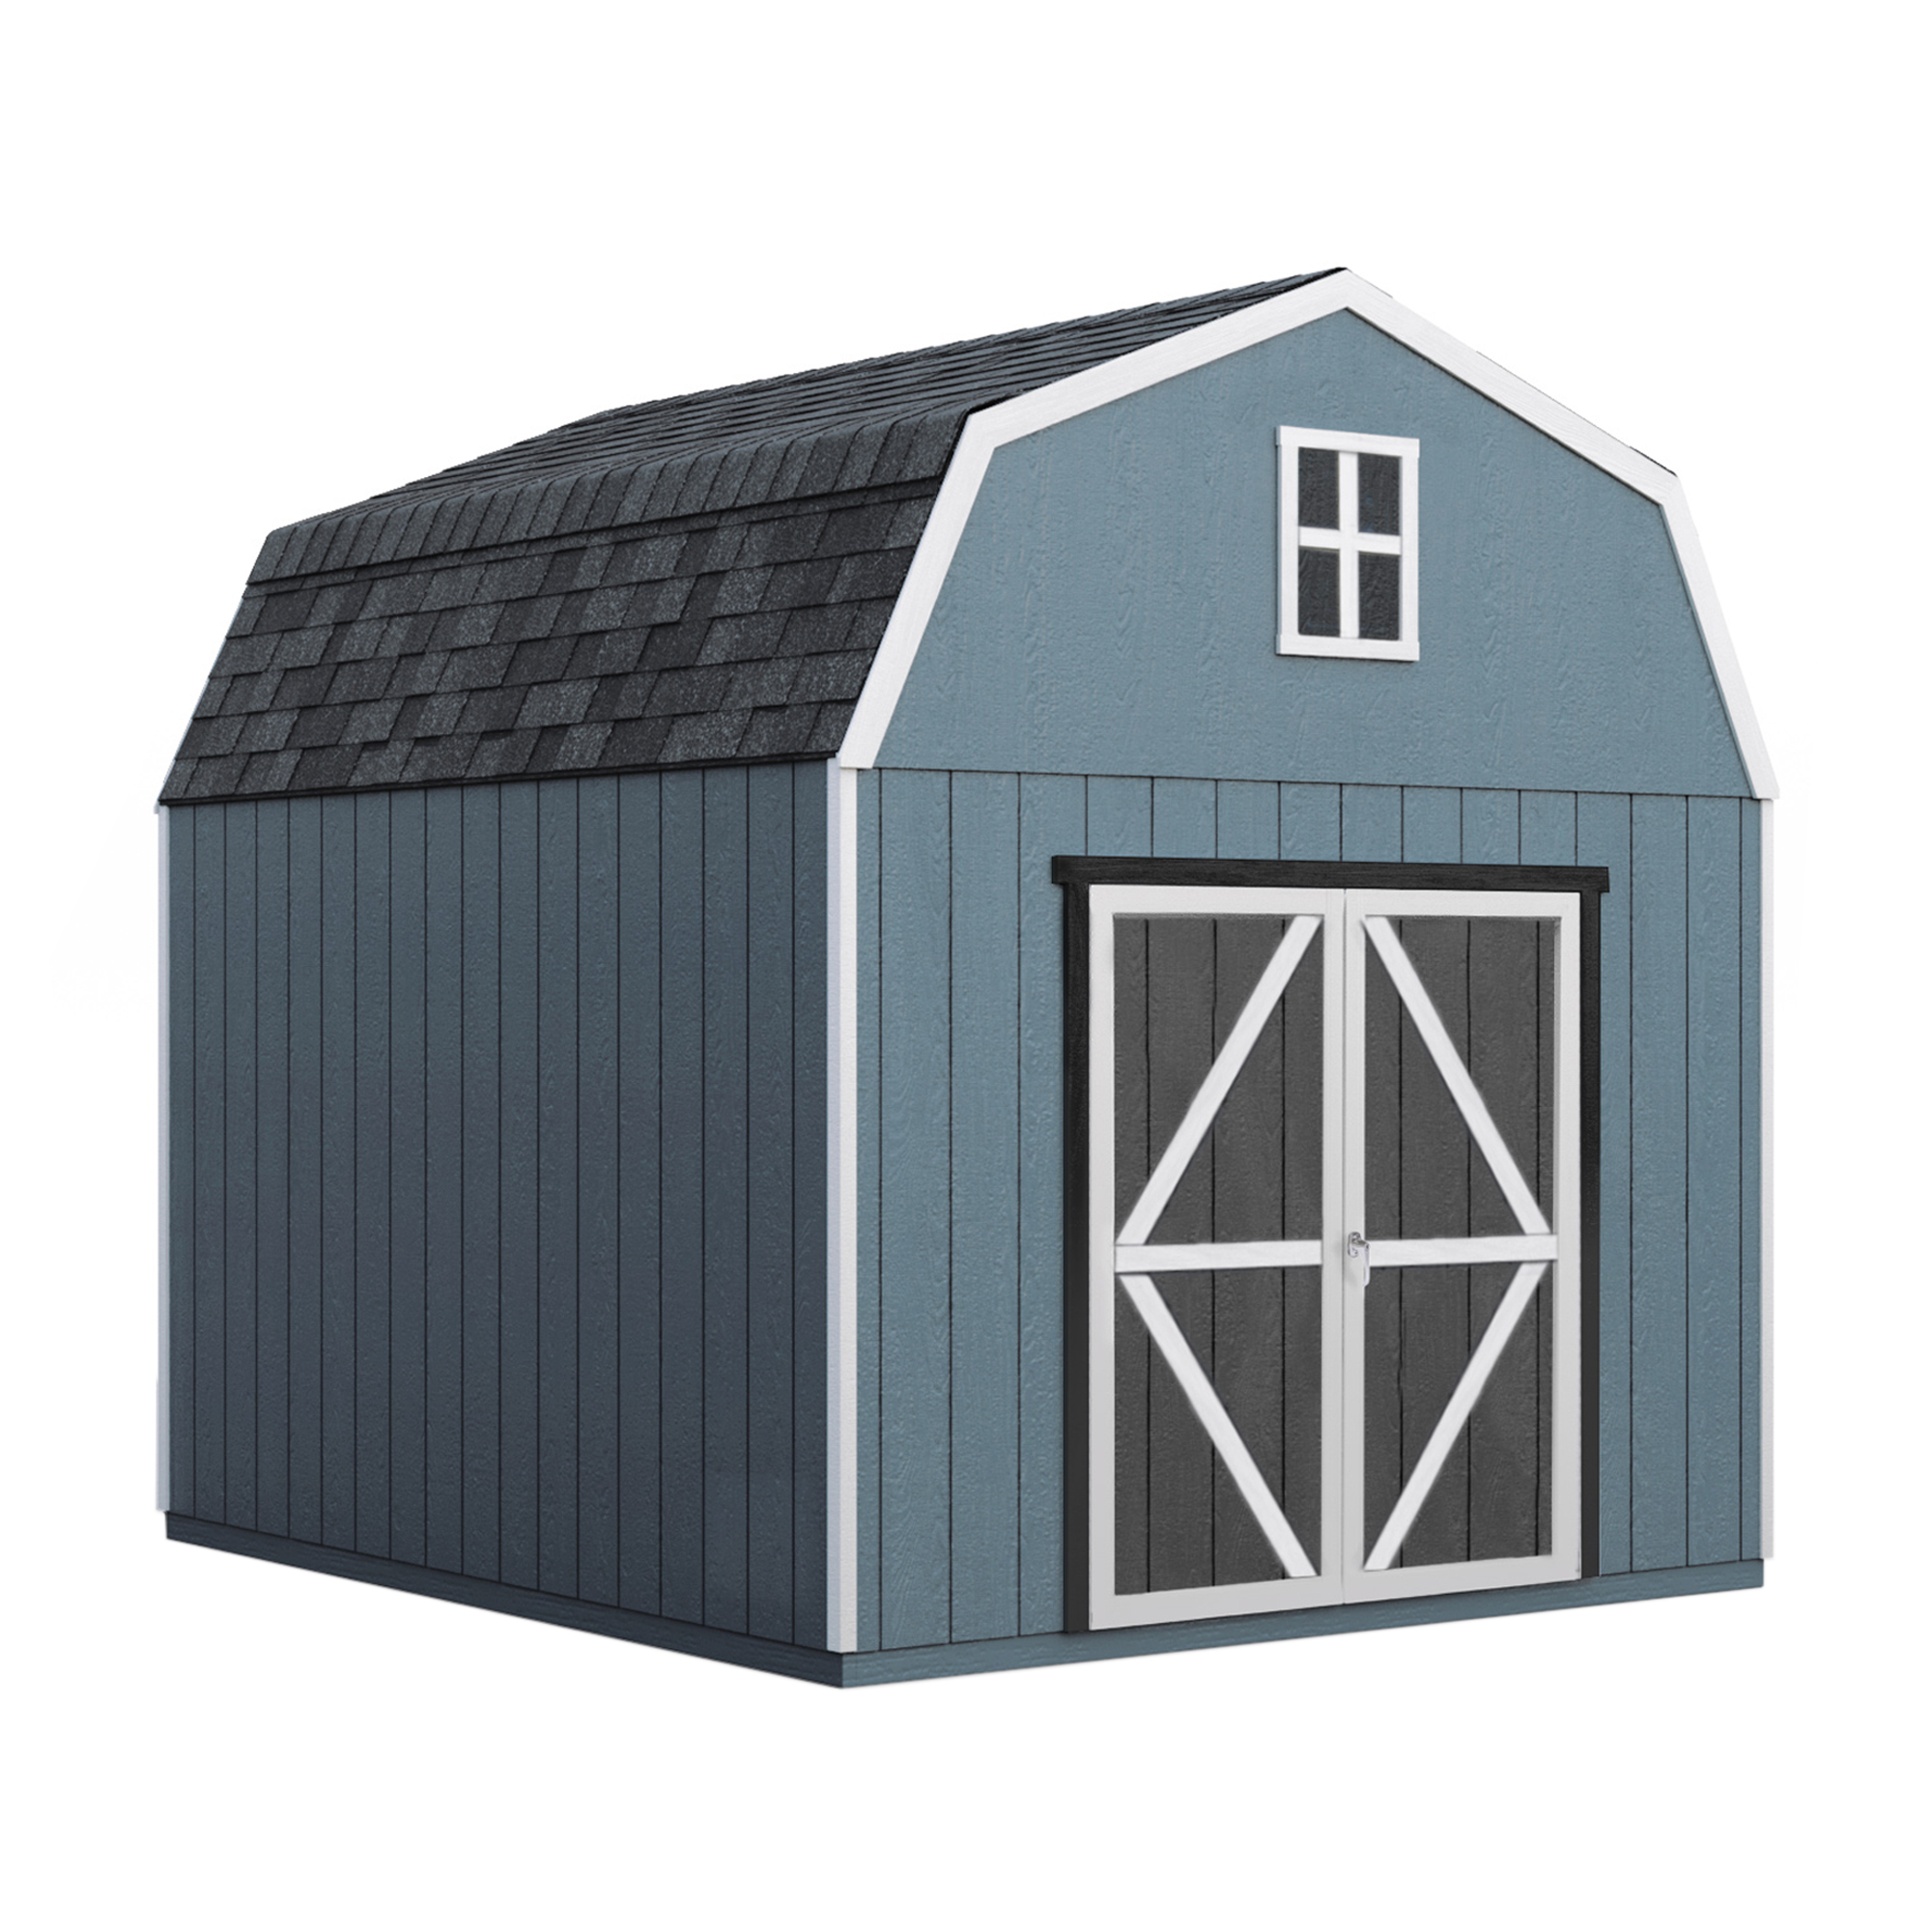 Handy Home 10x16 Braymore Wood Storage Shed Kit (19456-6) This shed comes pre-cut and ready to assemble.